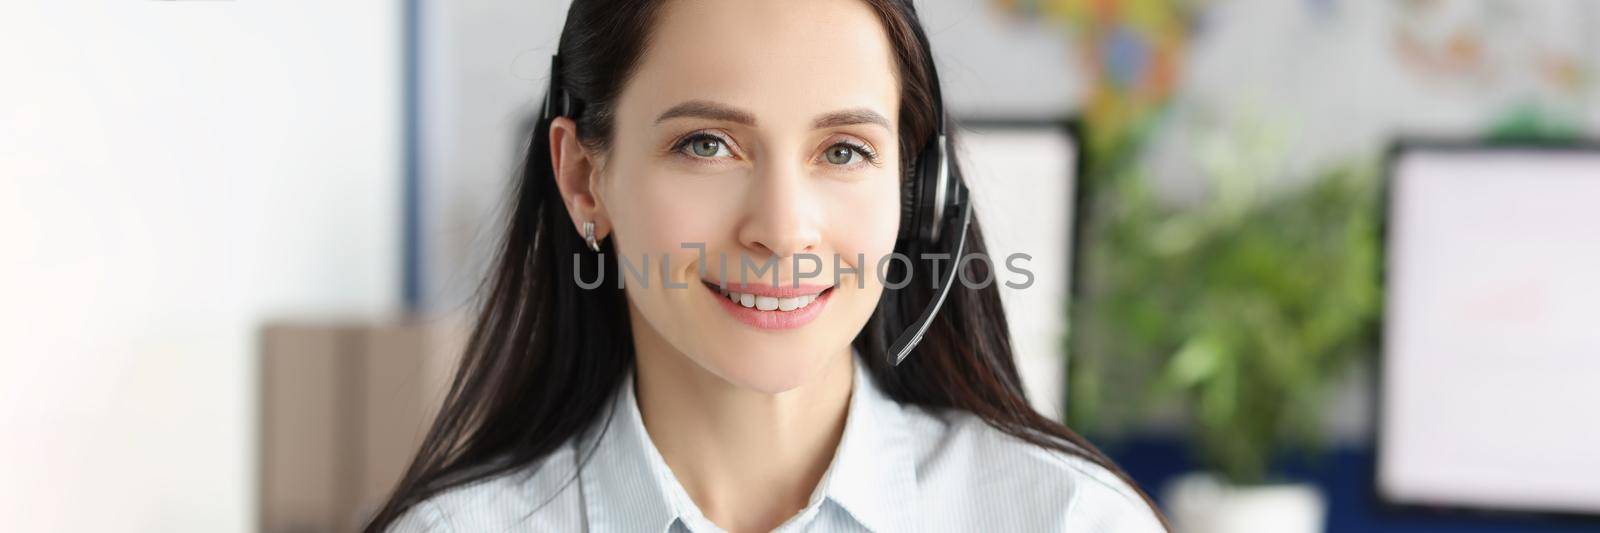 Lady support service worker wear headset with microphone for voice connection by kuprevich